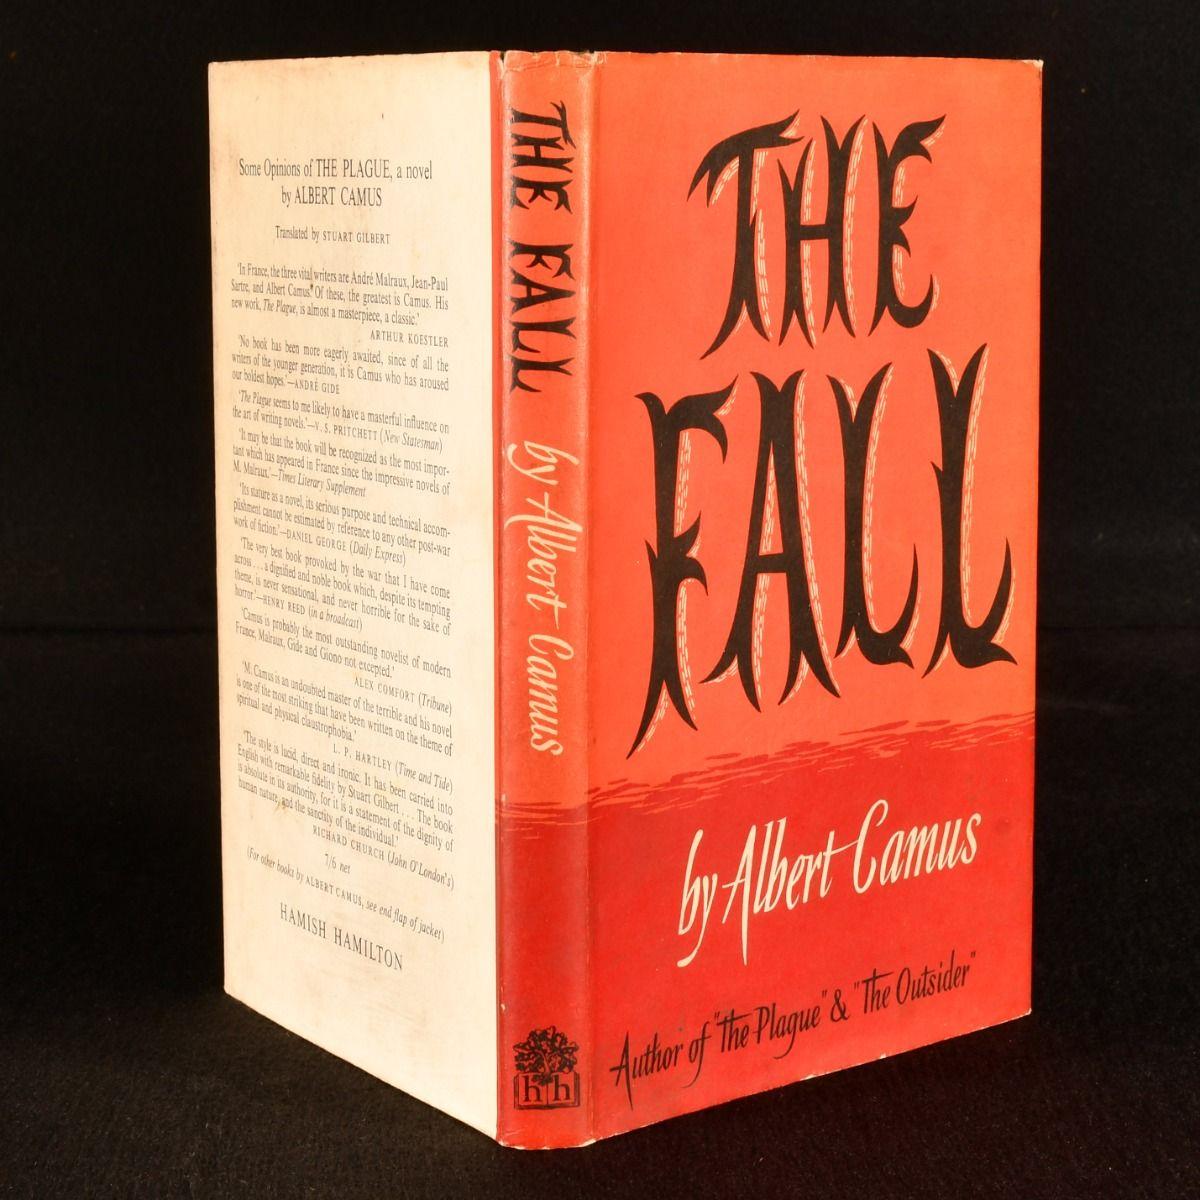 A superb copy of the first UK edition of this philosophical novel from French existentialist author, Albert Camus.

The first UK edition, first impression with no further impressions stated.

This work was first published in French, titled 'La